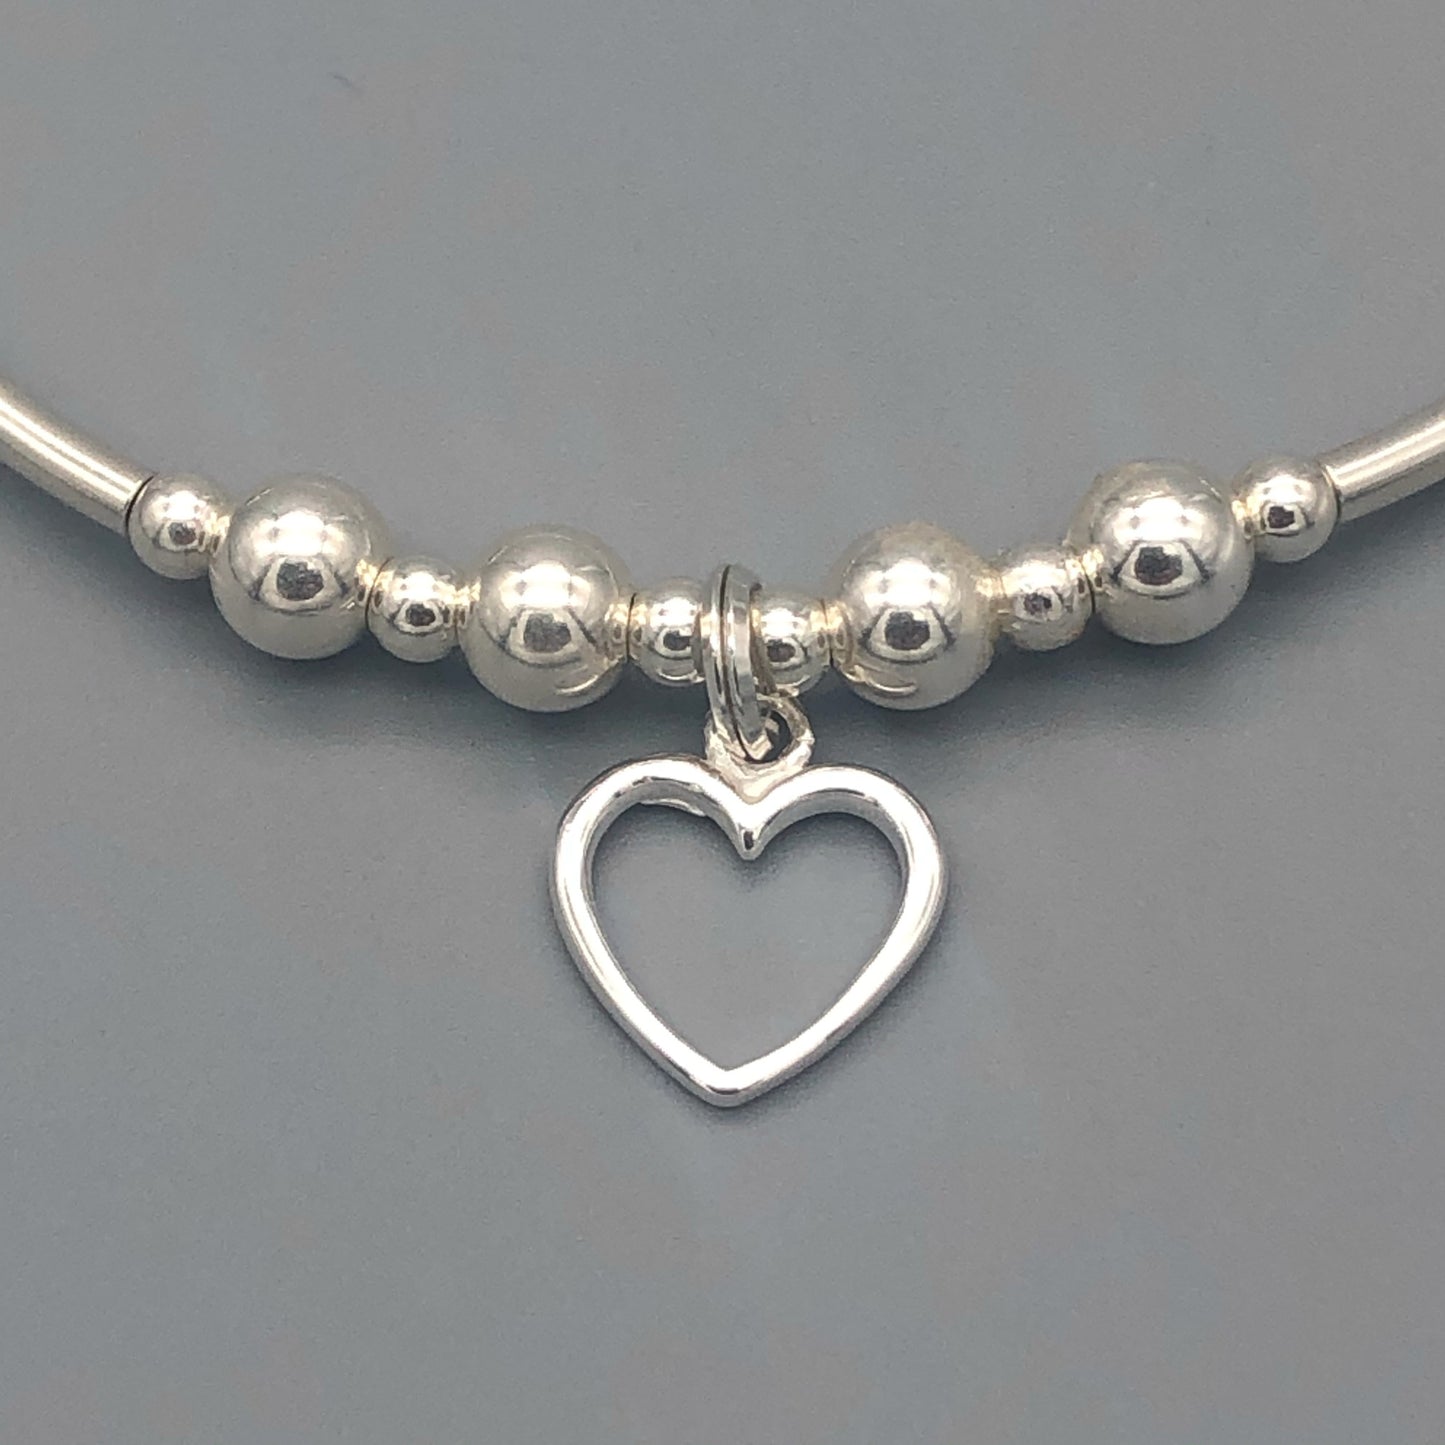 Closeup of Small open heart sterling silver stacking charm bracelet by My Silver Wish